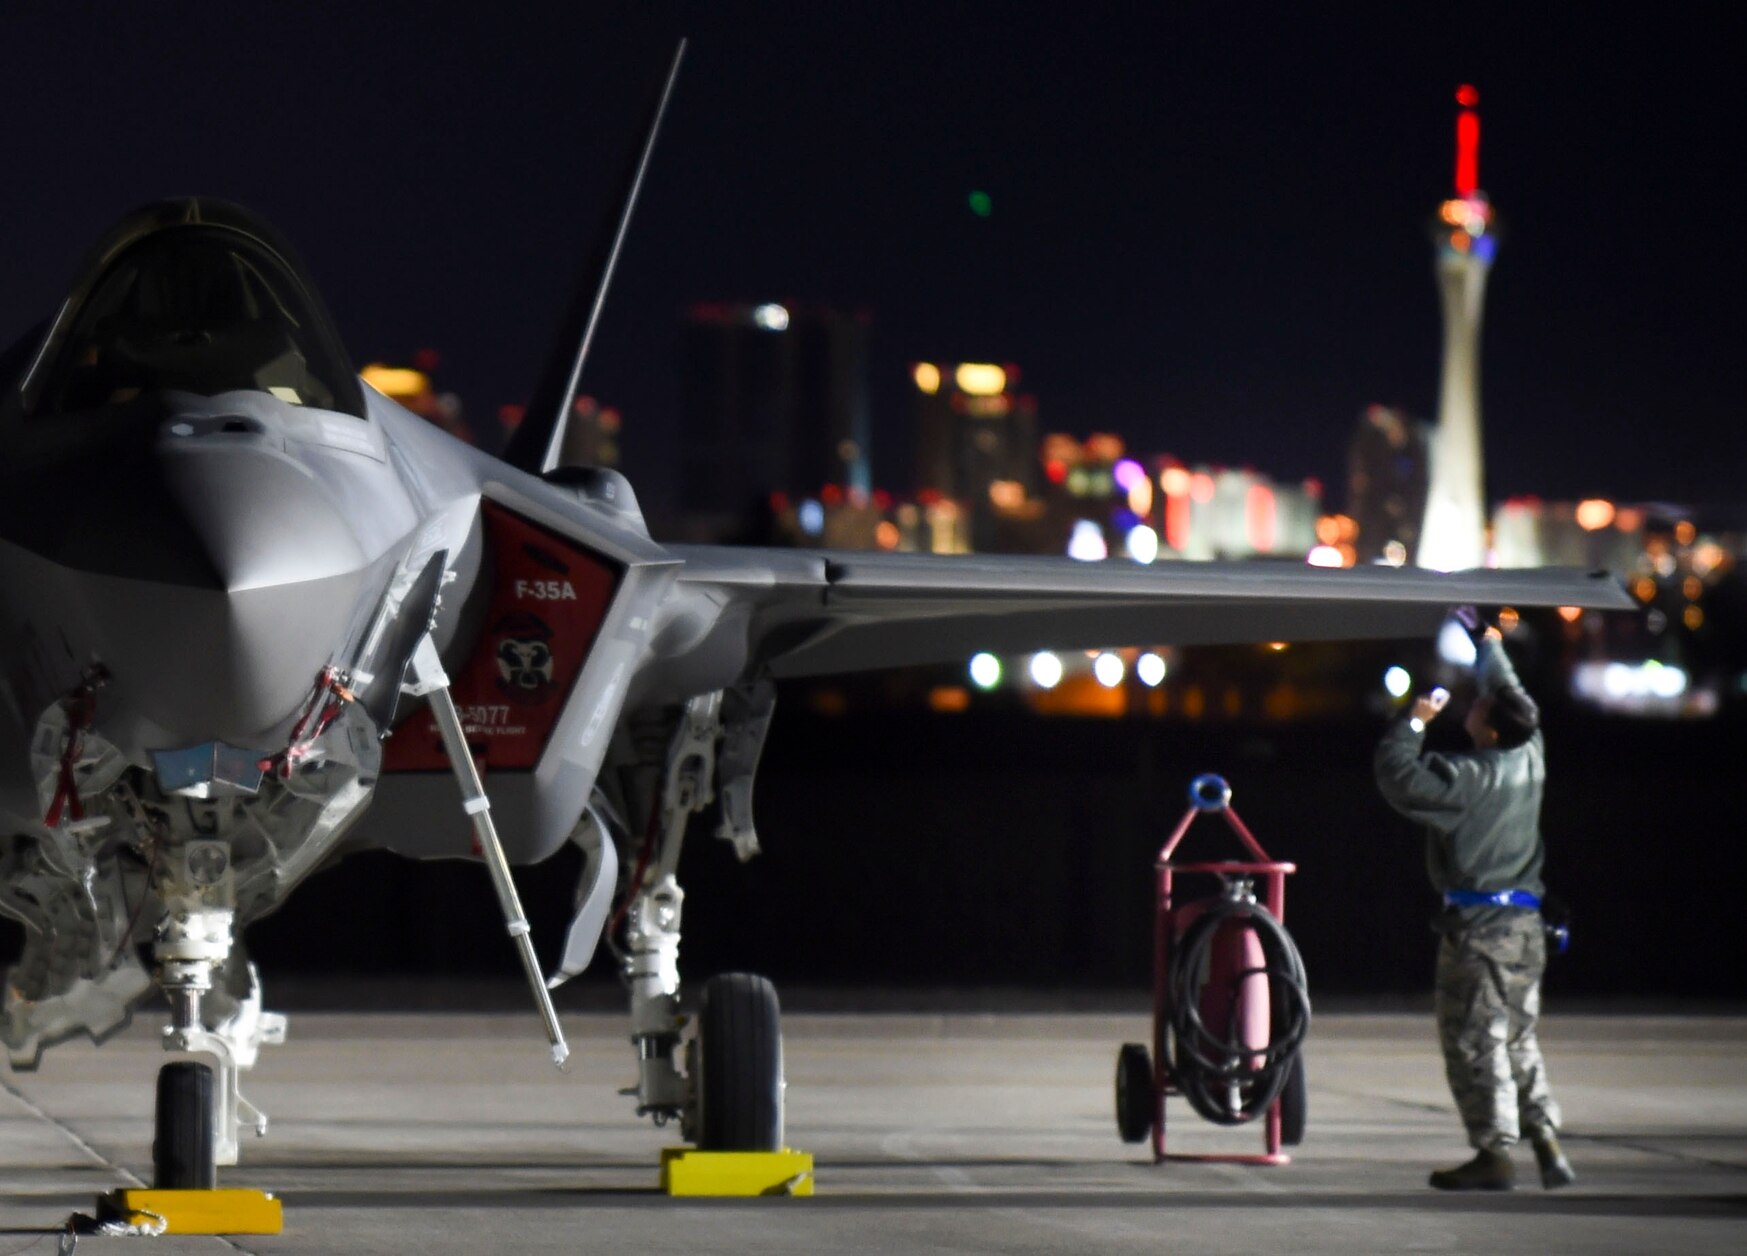 A maintainer with the 388th Fighter Wing out of Hill Air Force Base, Utah, checks for structural damages on an F-35A during Red Flag 17-1 at Nellis Air Force Base, Nev., on Jan. 25, 2017. (Staff Sgt. Natasha Stannard/U.S. Air Force)